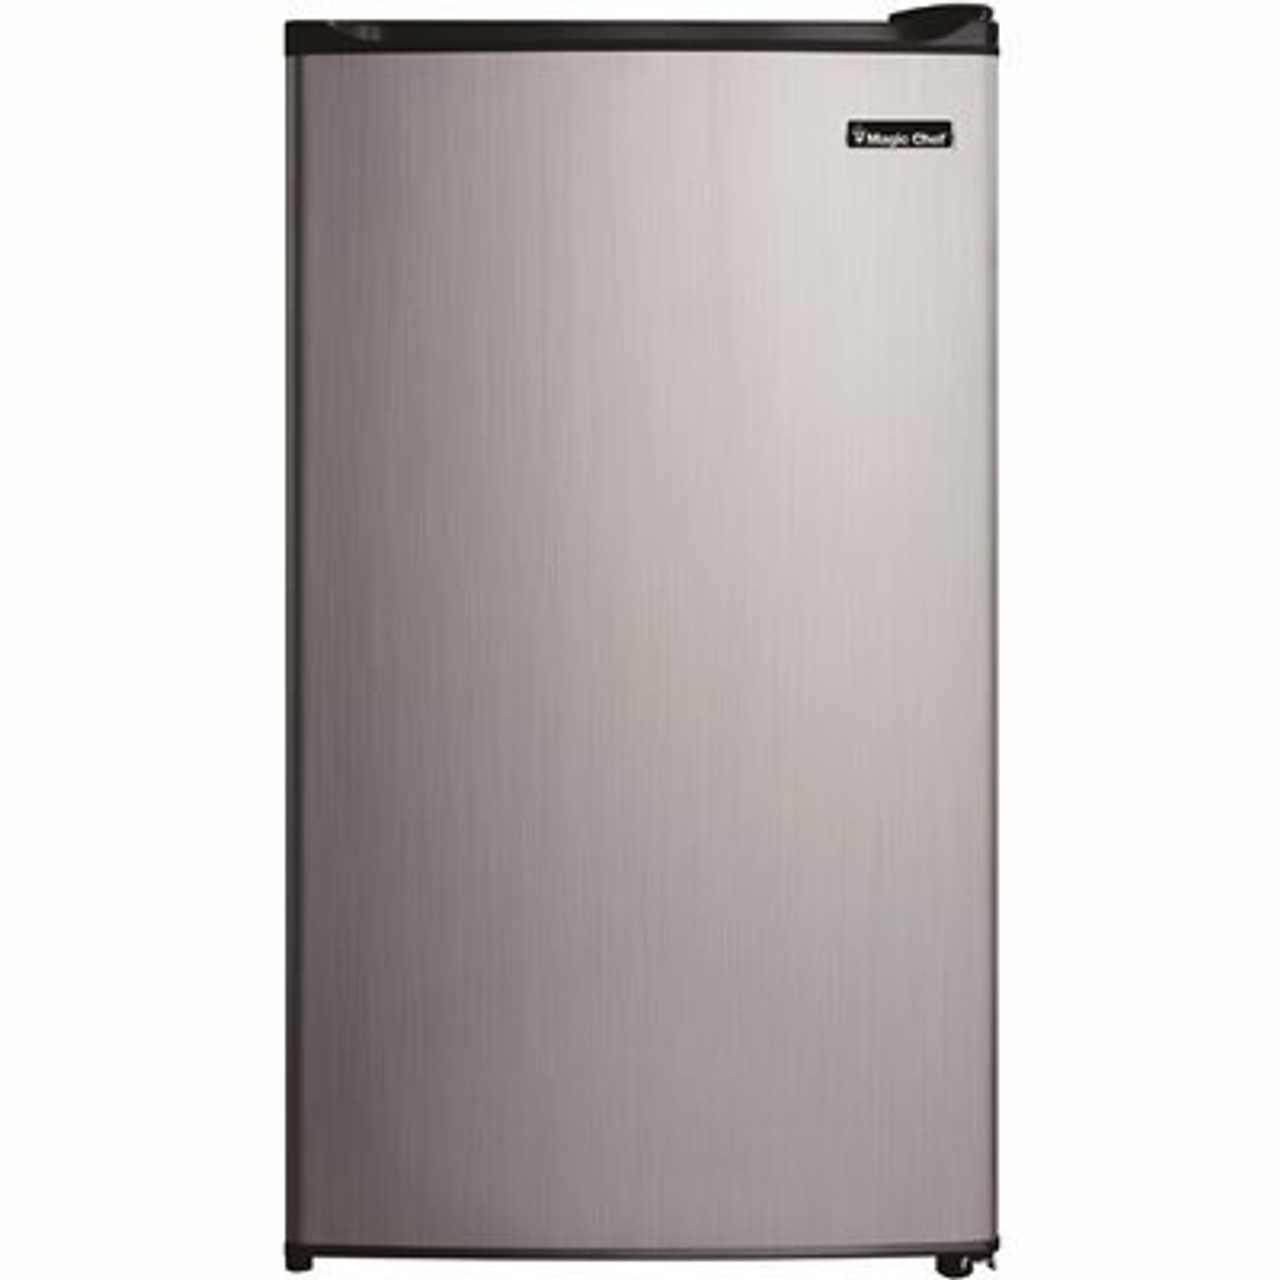 Magic Chef 3.5 Cu. Ft. Mini Refrigerator In Stainless Look With Freezer Section